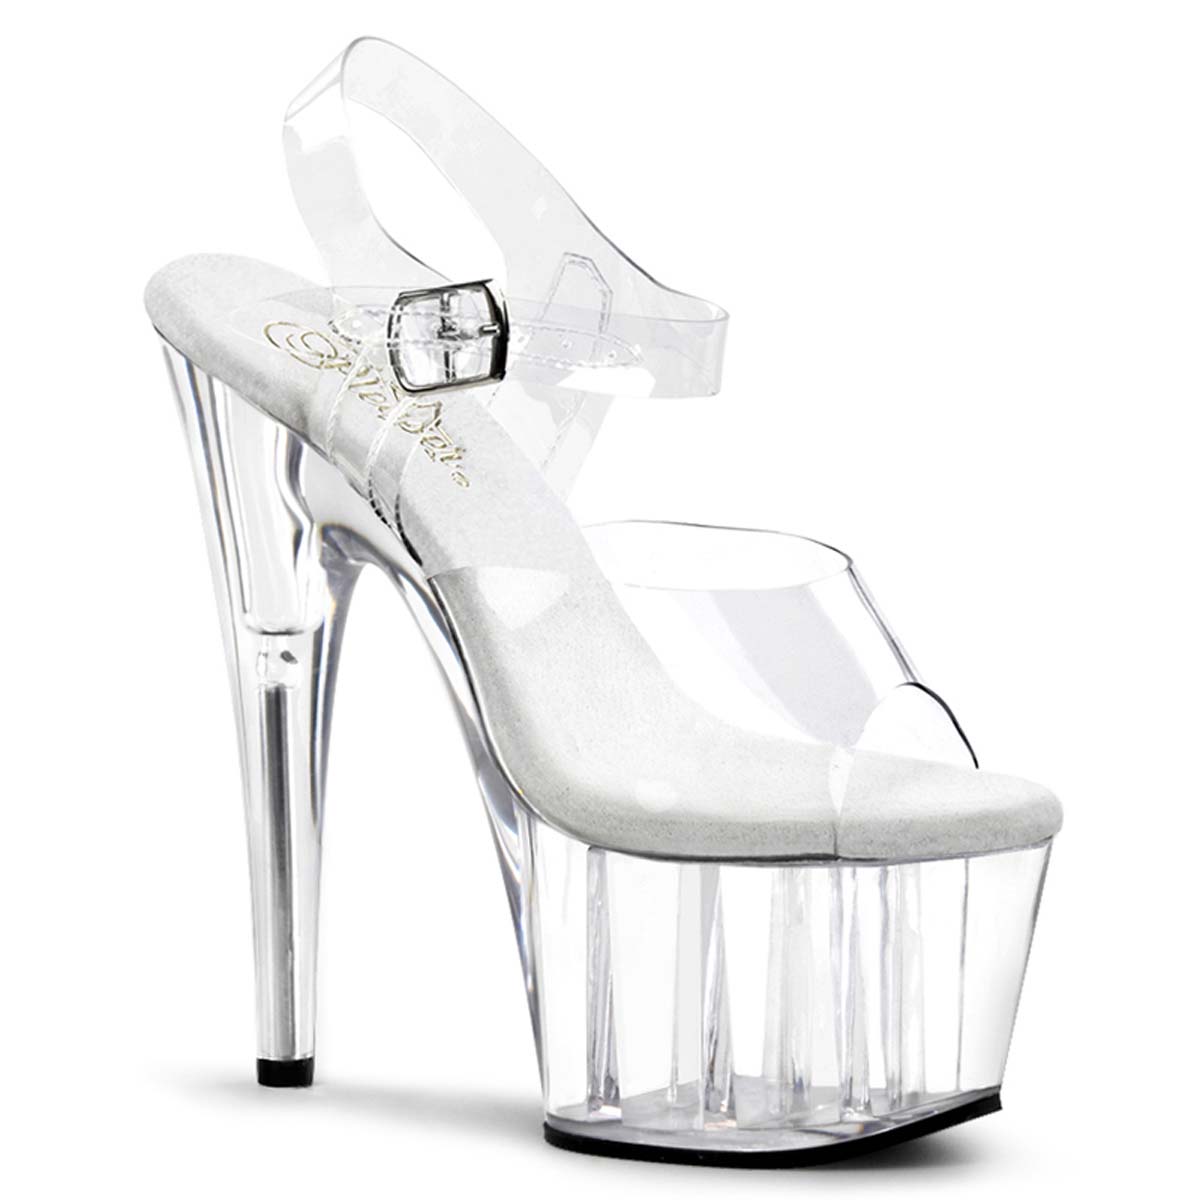 Pleaser Adore-708 - Clear/Clear in Sexy Heels & Platforms - $53.95